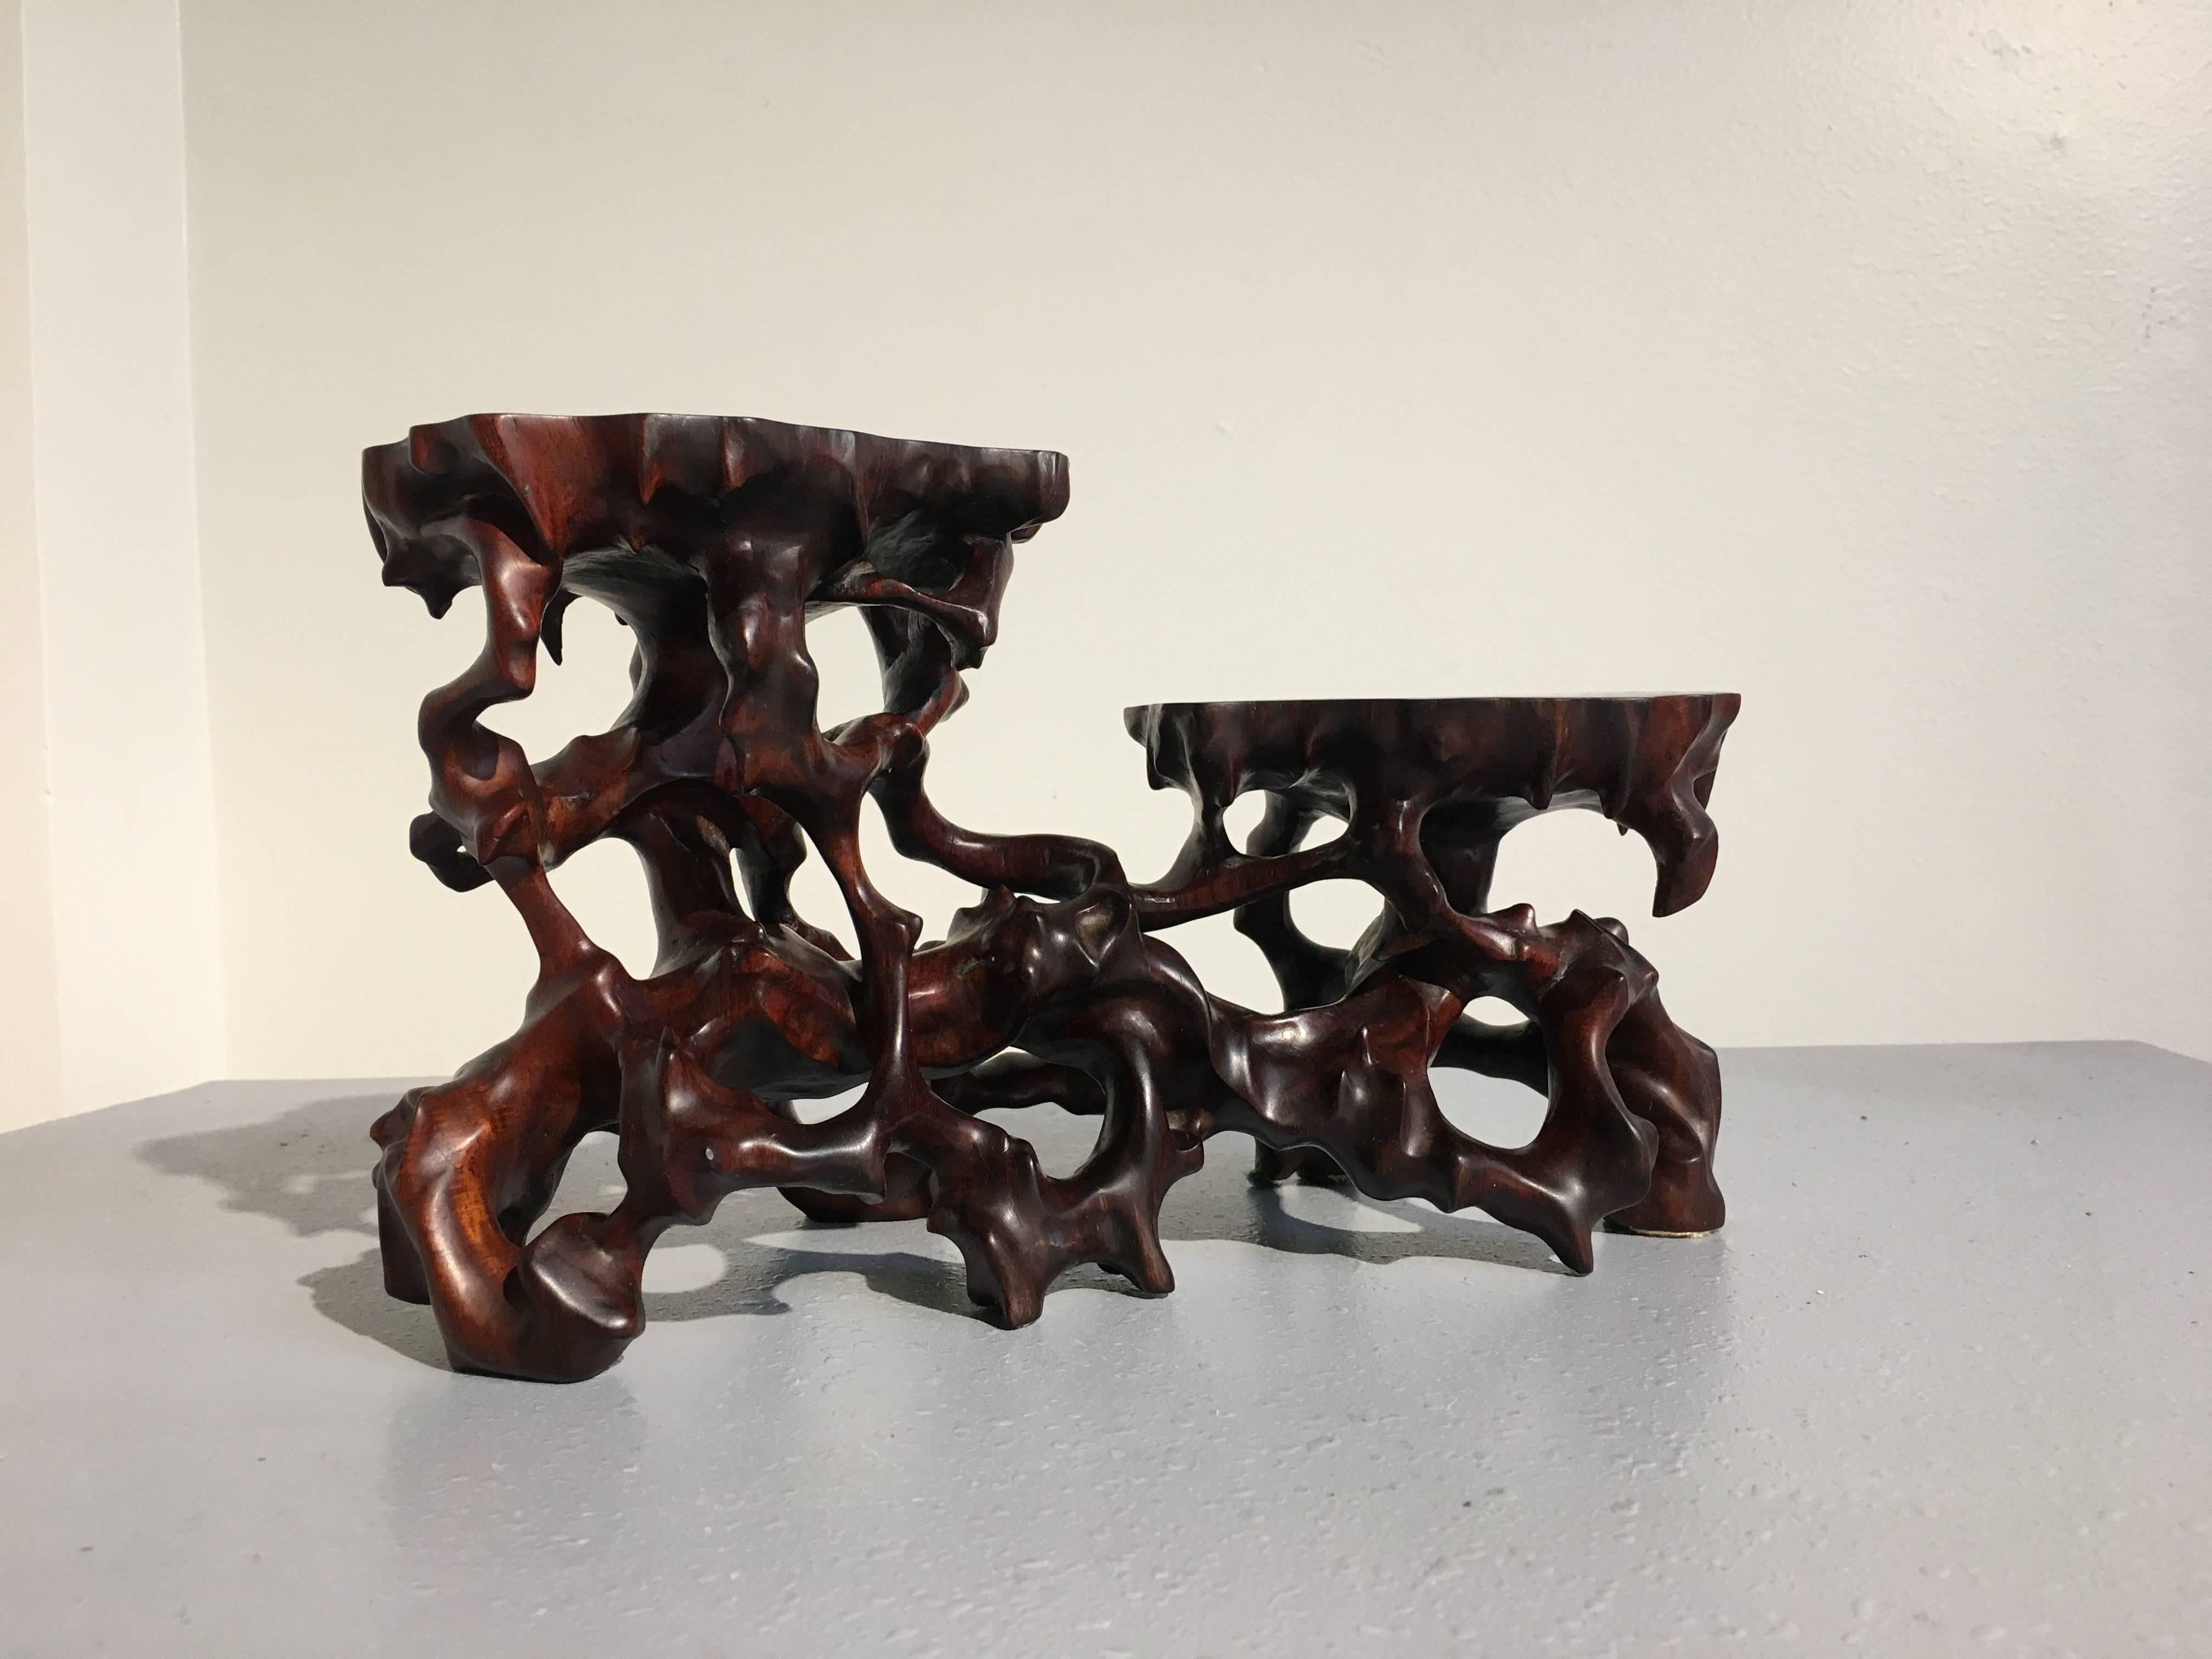 A dramatic and evocative, naturalistic Chinese carved hardwood double display stand.

Used by Chinese scholars to display treasured objects, this display stand has been carved of hongmu (rosewood) to imitate a natural gnarled and intertwined